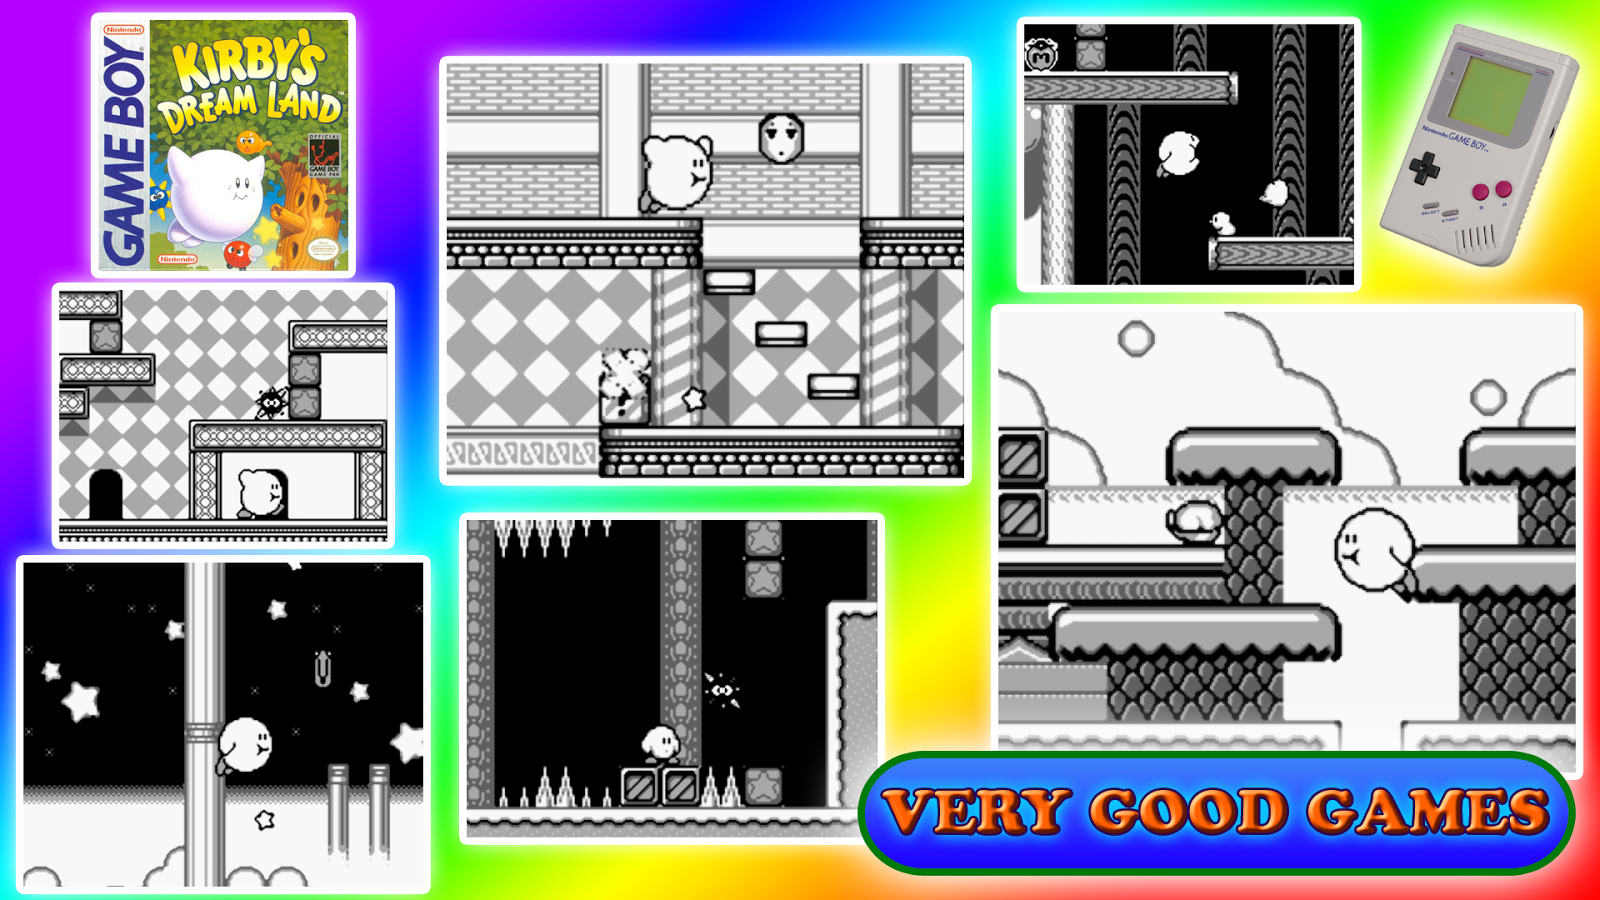 A banner with screenshots from Kirby’s Dream Land - the very first game of Kirby series, made for GameBoy and available for Nintendo 3DS and 2DS